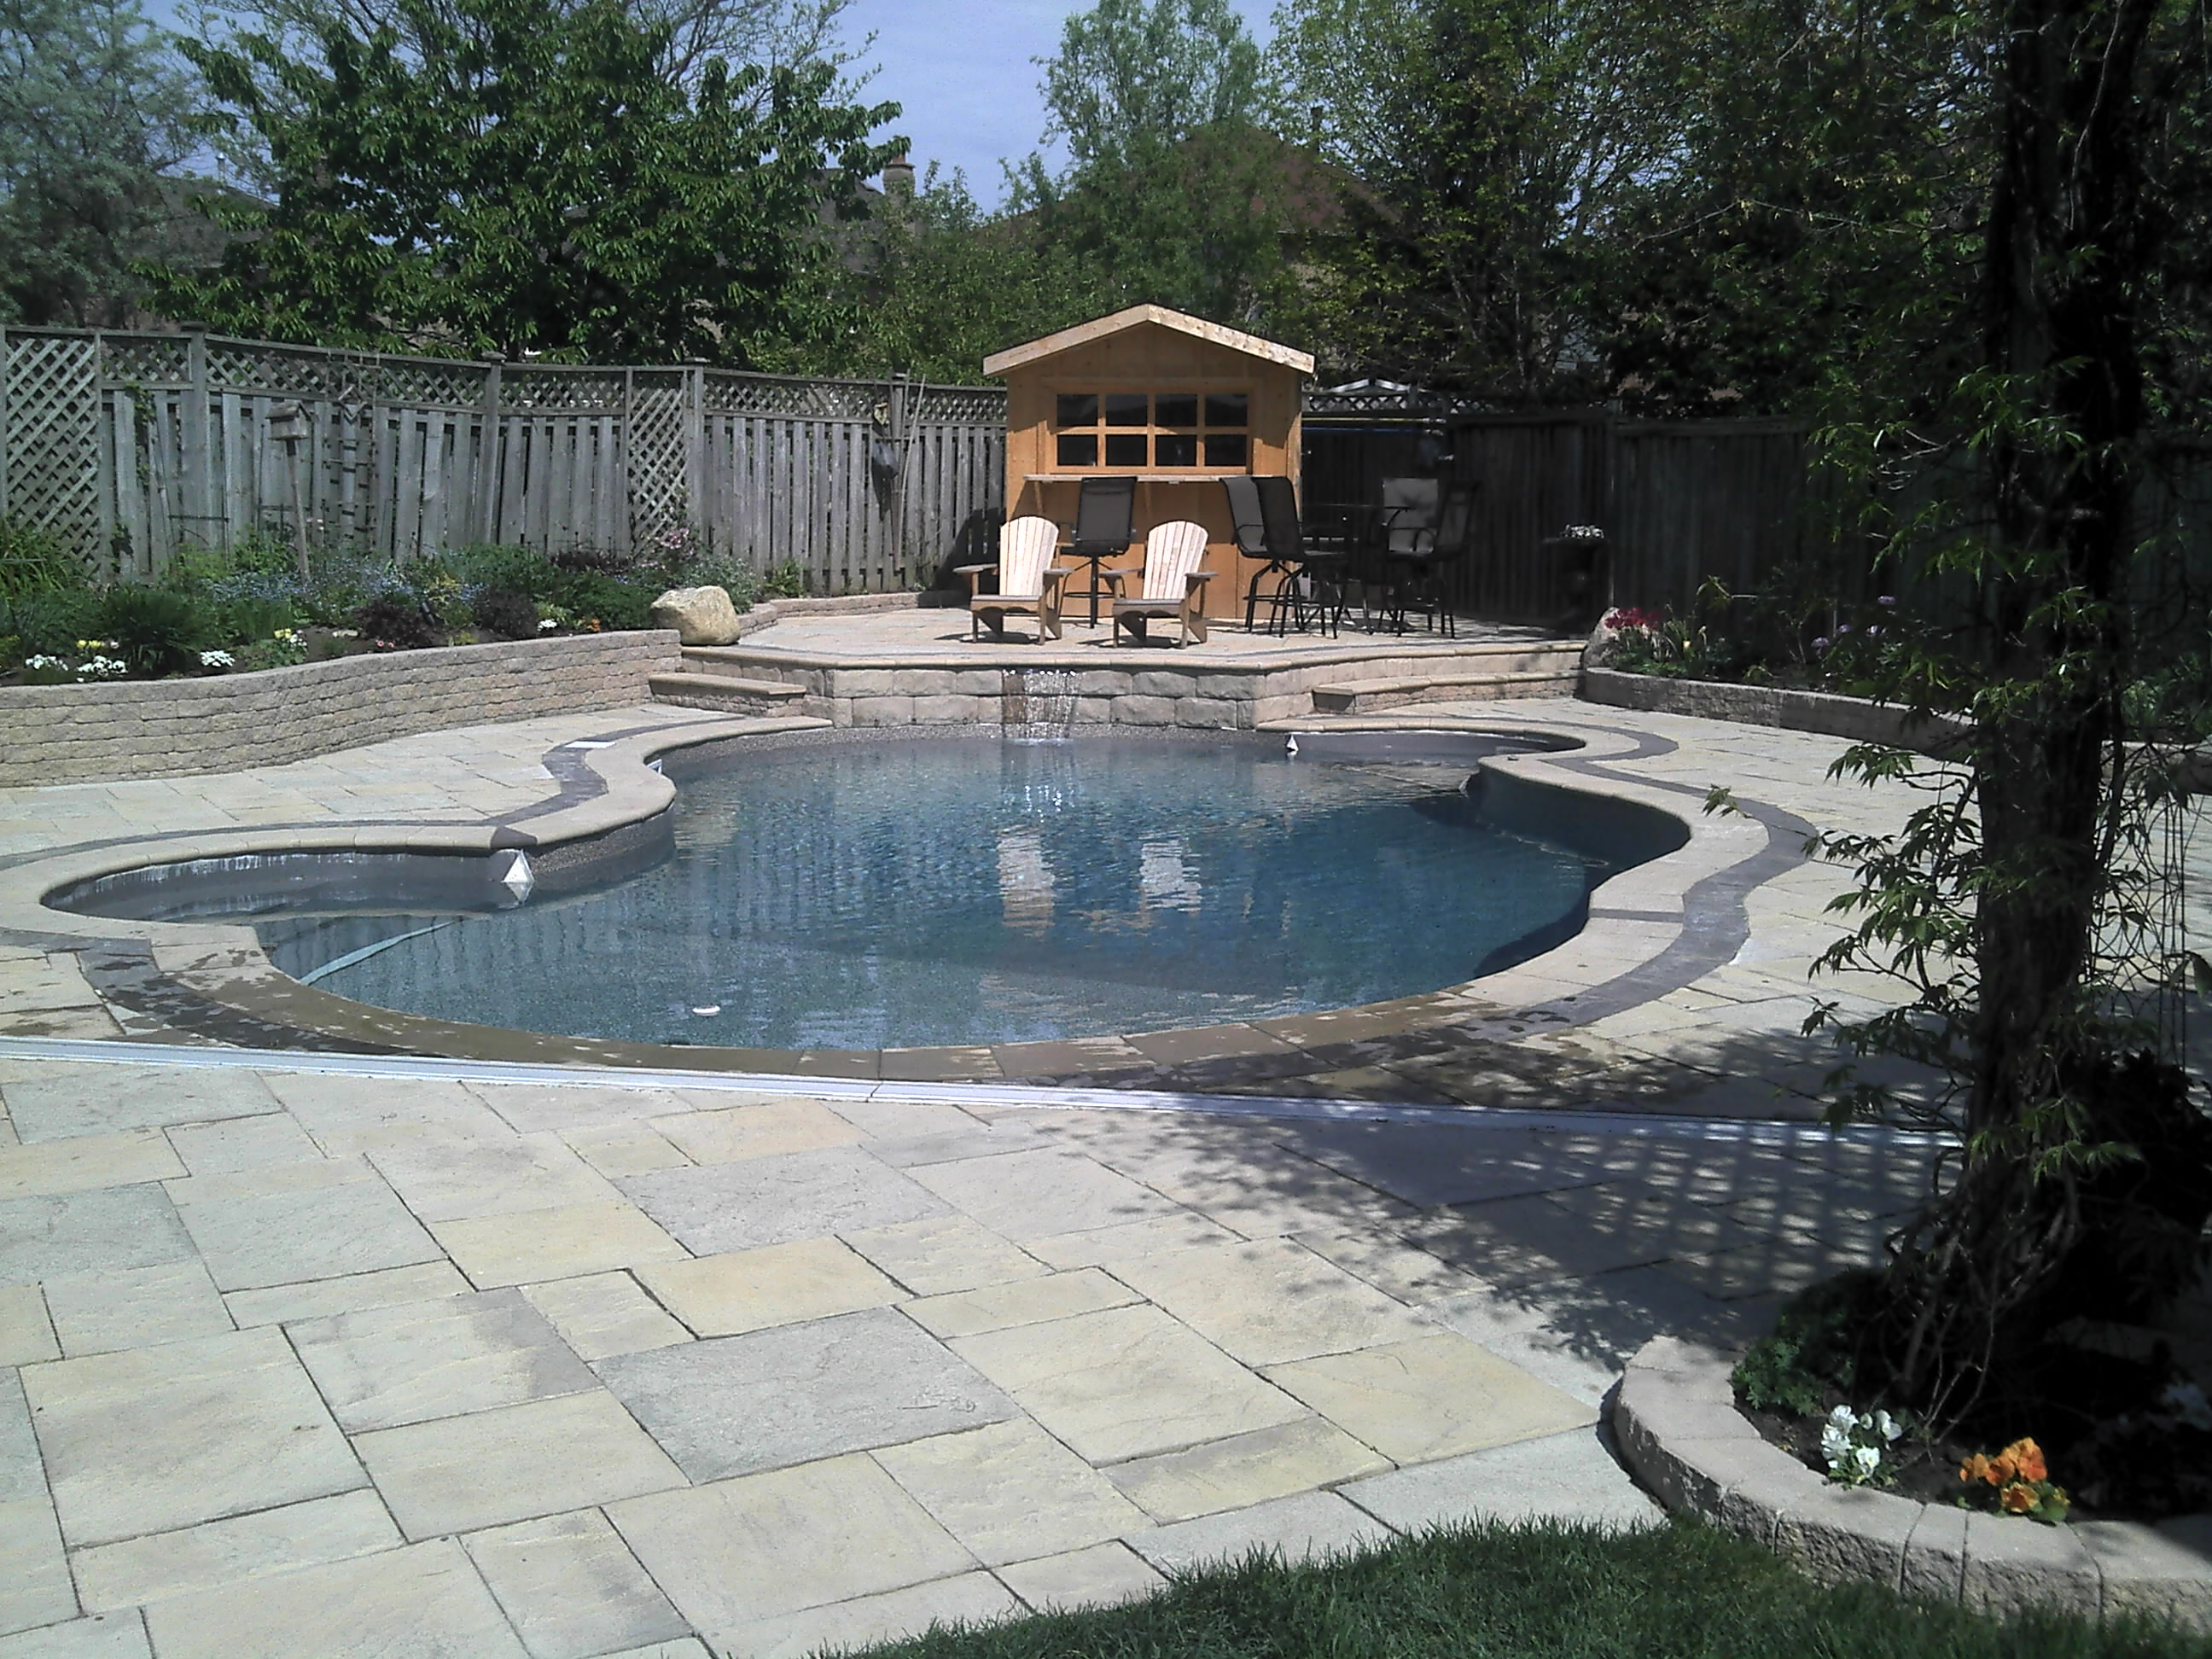 FEATURED-PATIO-AND-POOL-PIC.jpg